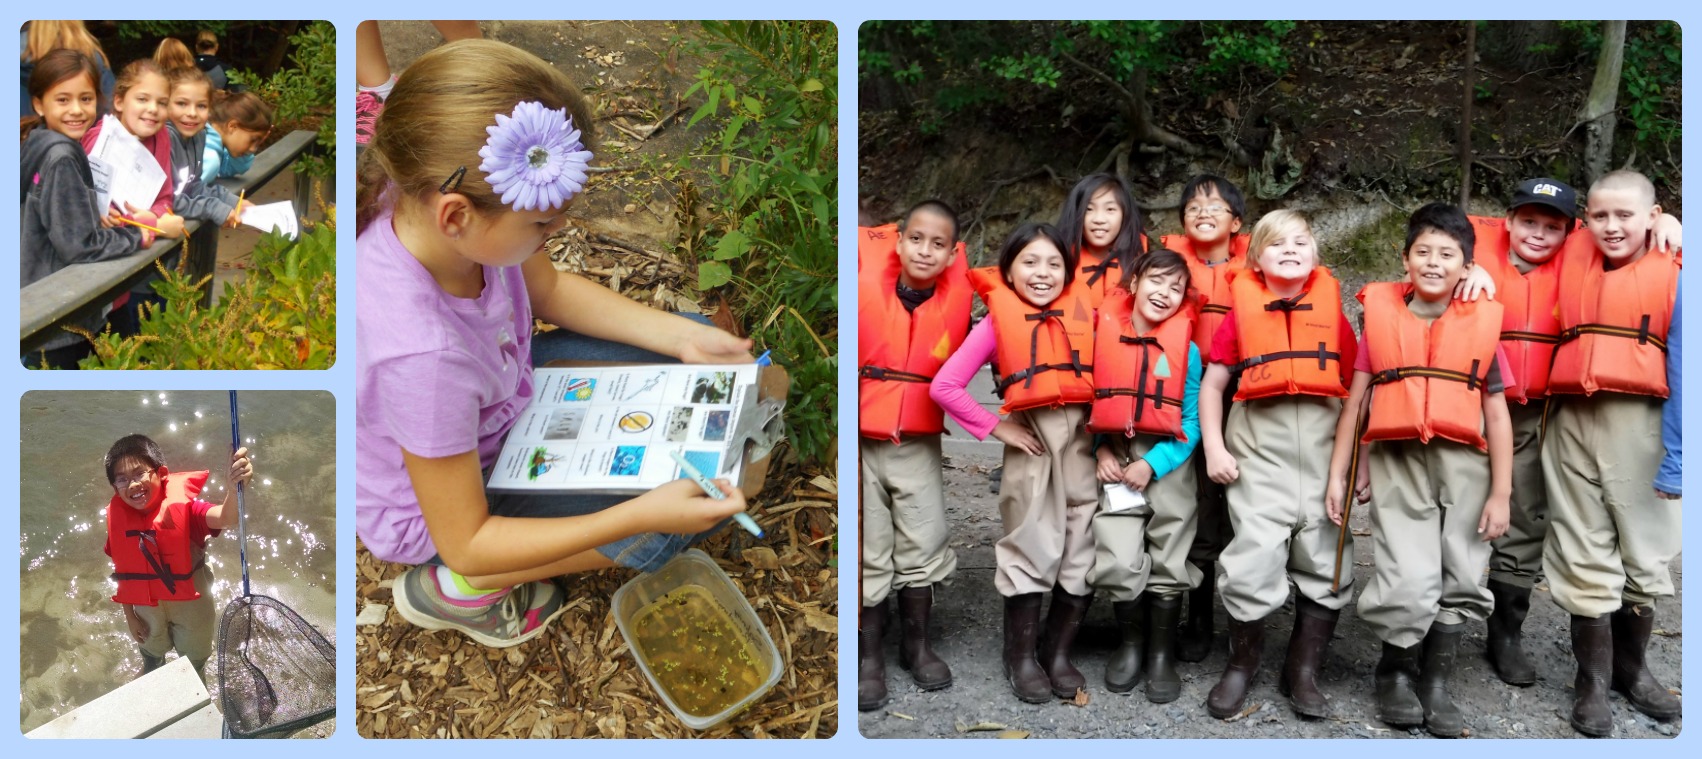 A collage of photos with students standing near a garden, holding a net, using a clipboard and standing with lifejackets on. 